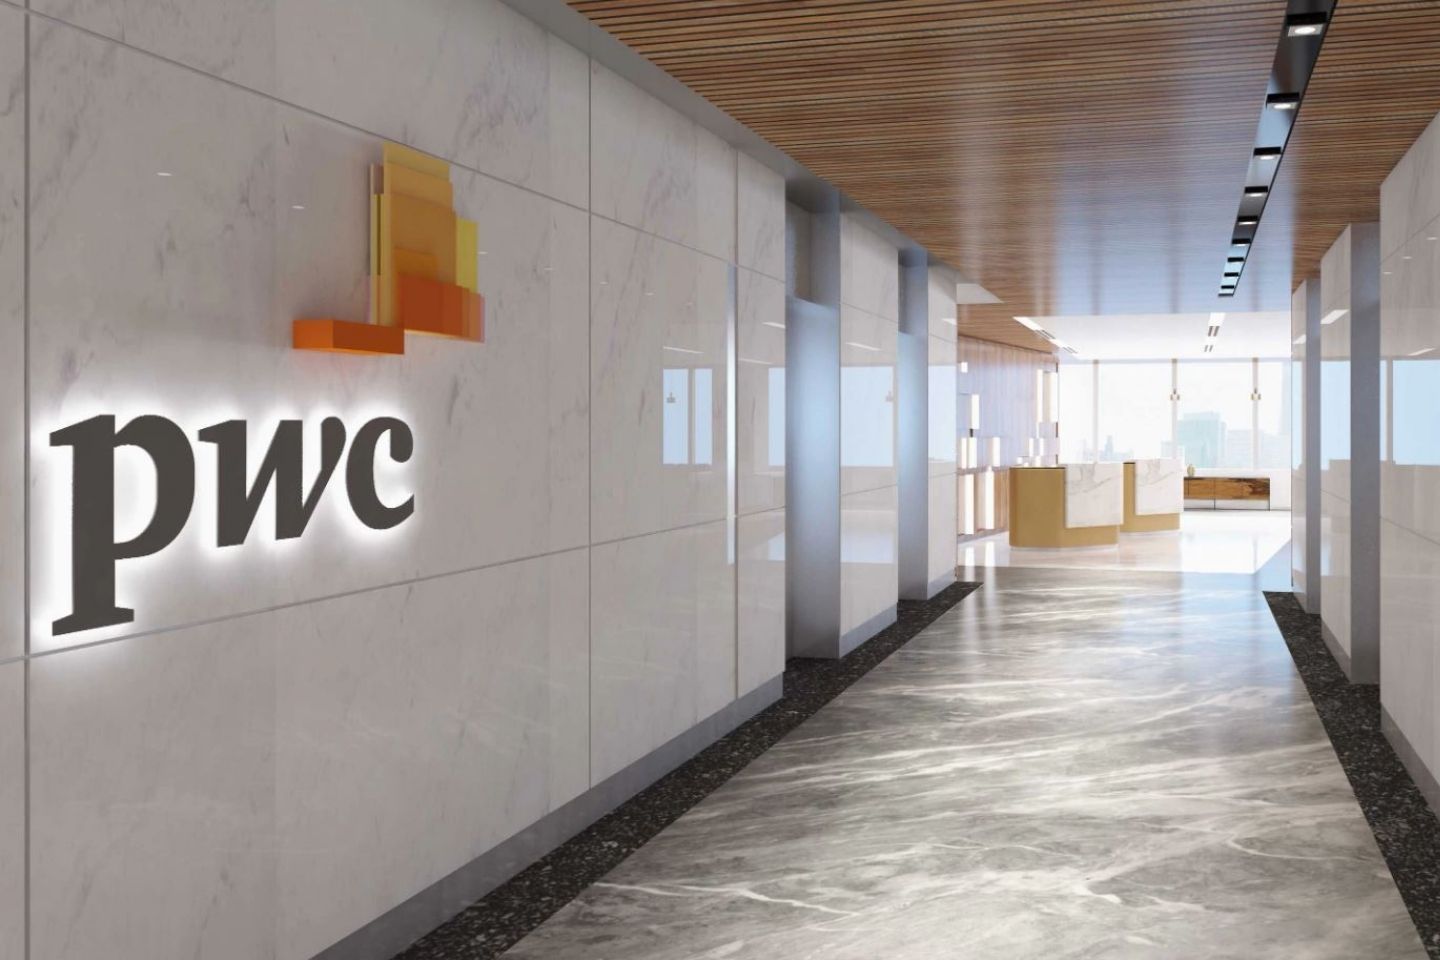 'Totally unacceptable': PwC boss issues public apology